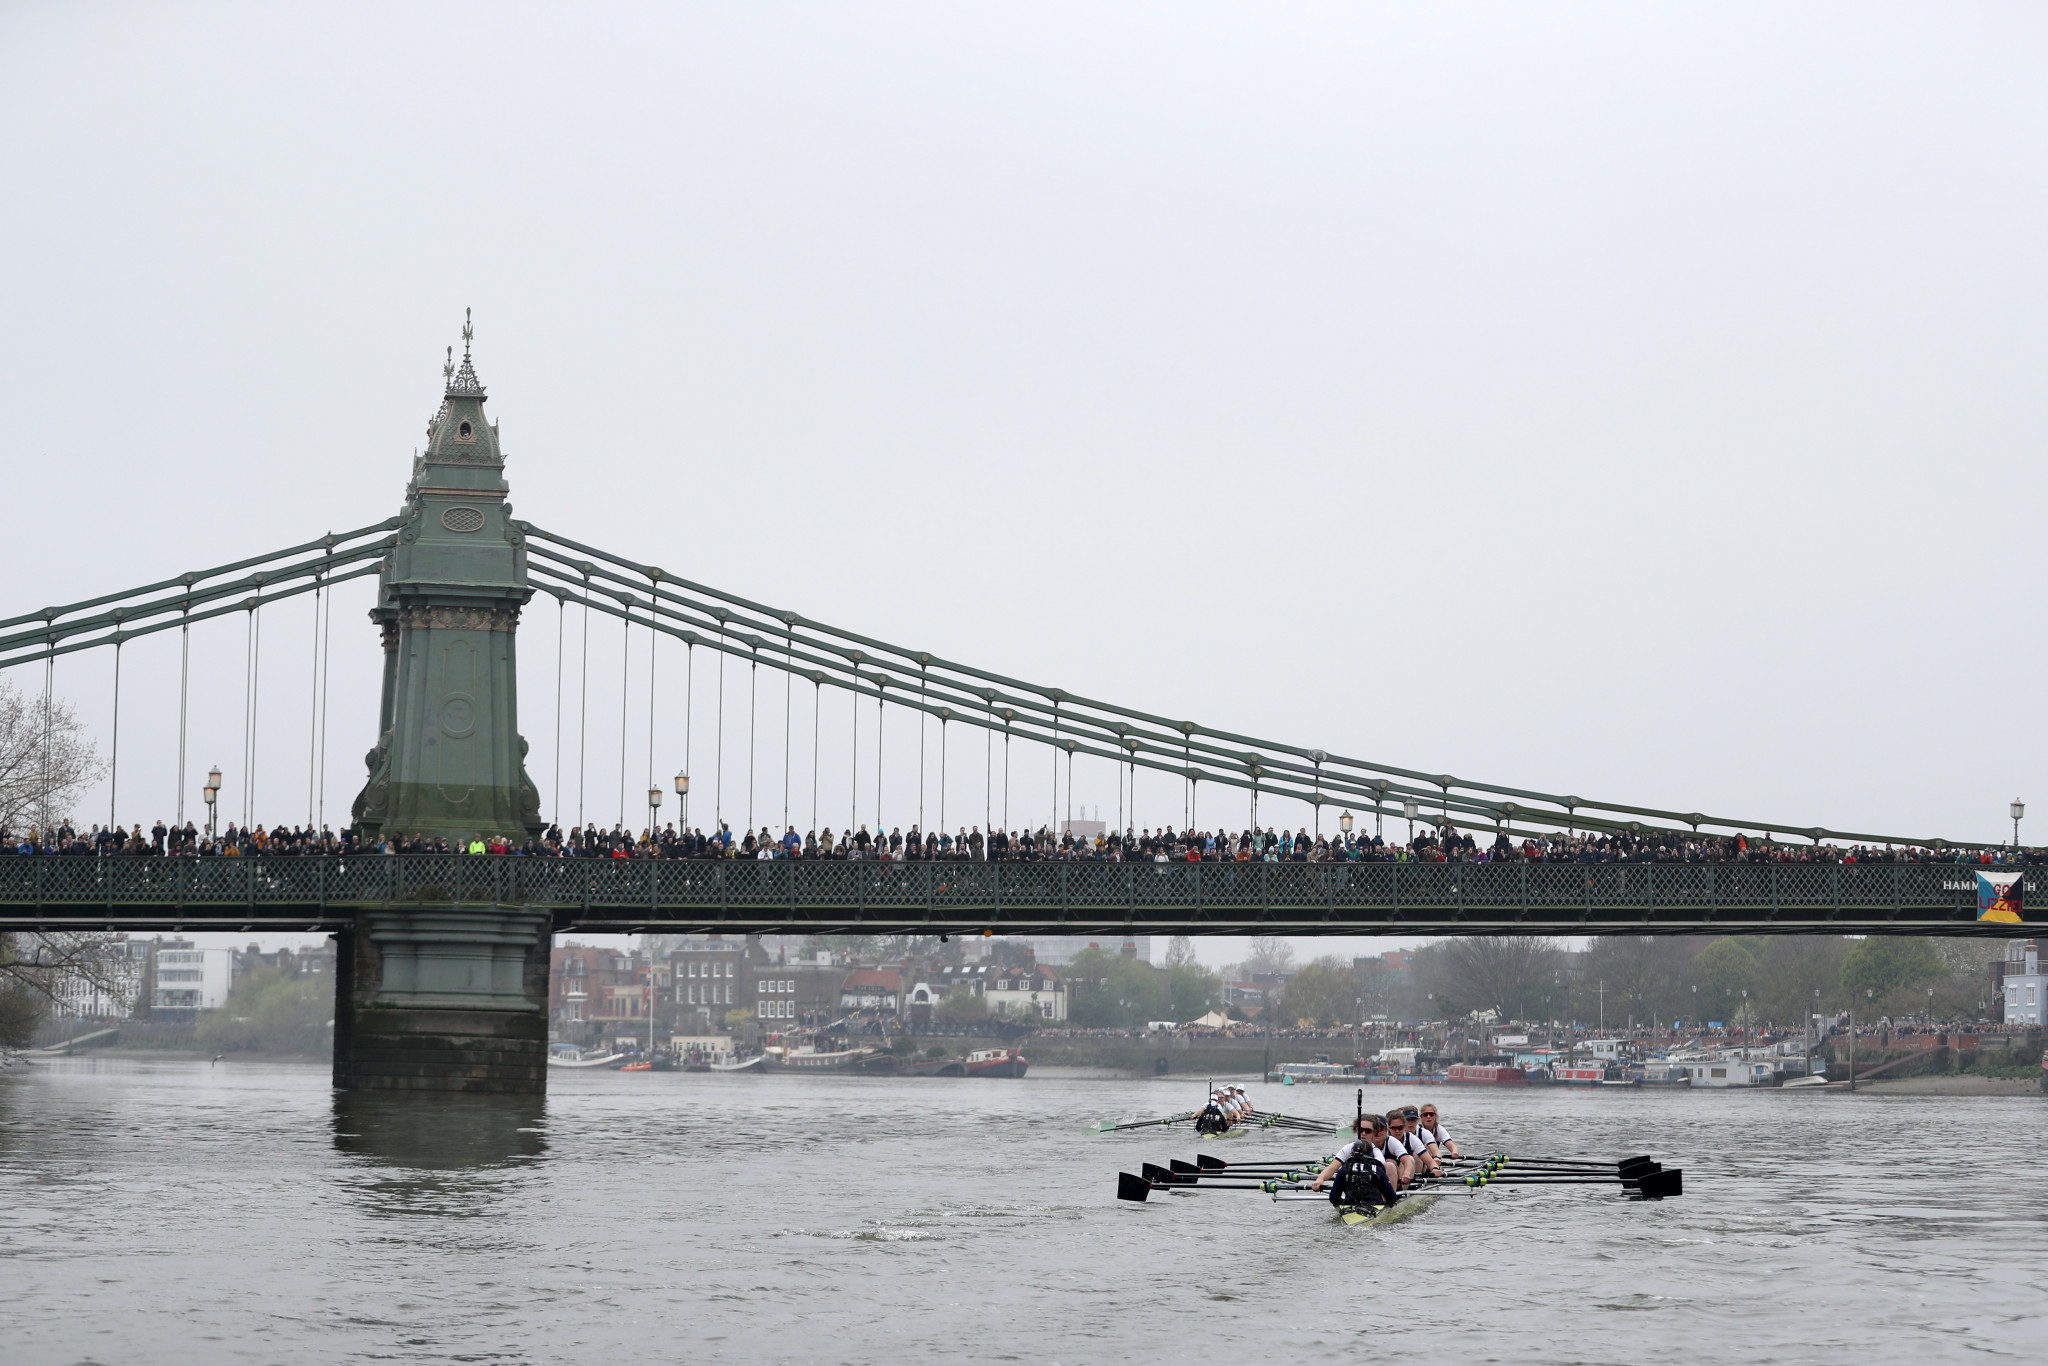 Uncertainty around the safety and navigation of Hammersmith Bridge was a reason behind the relocation of the Boat Race to Ely ©Getty Images 